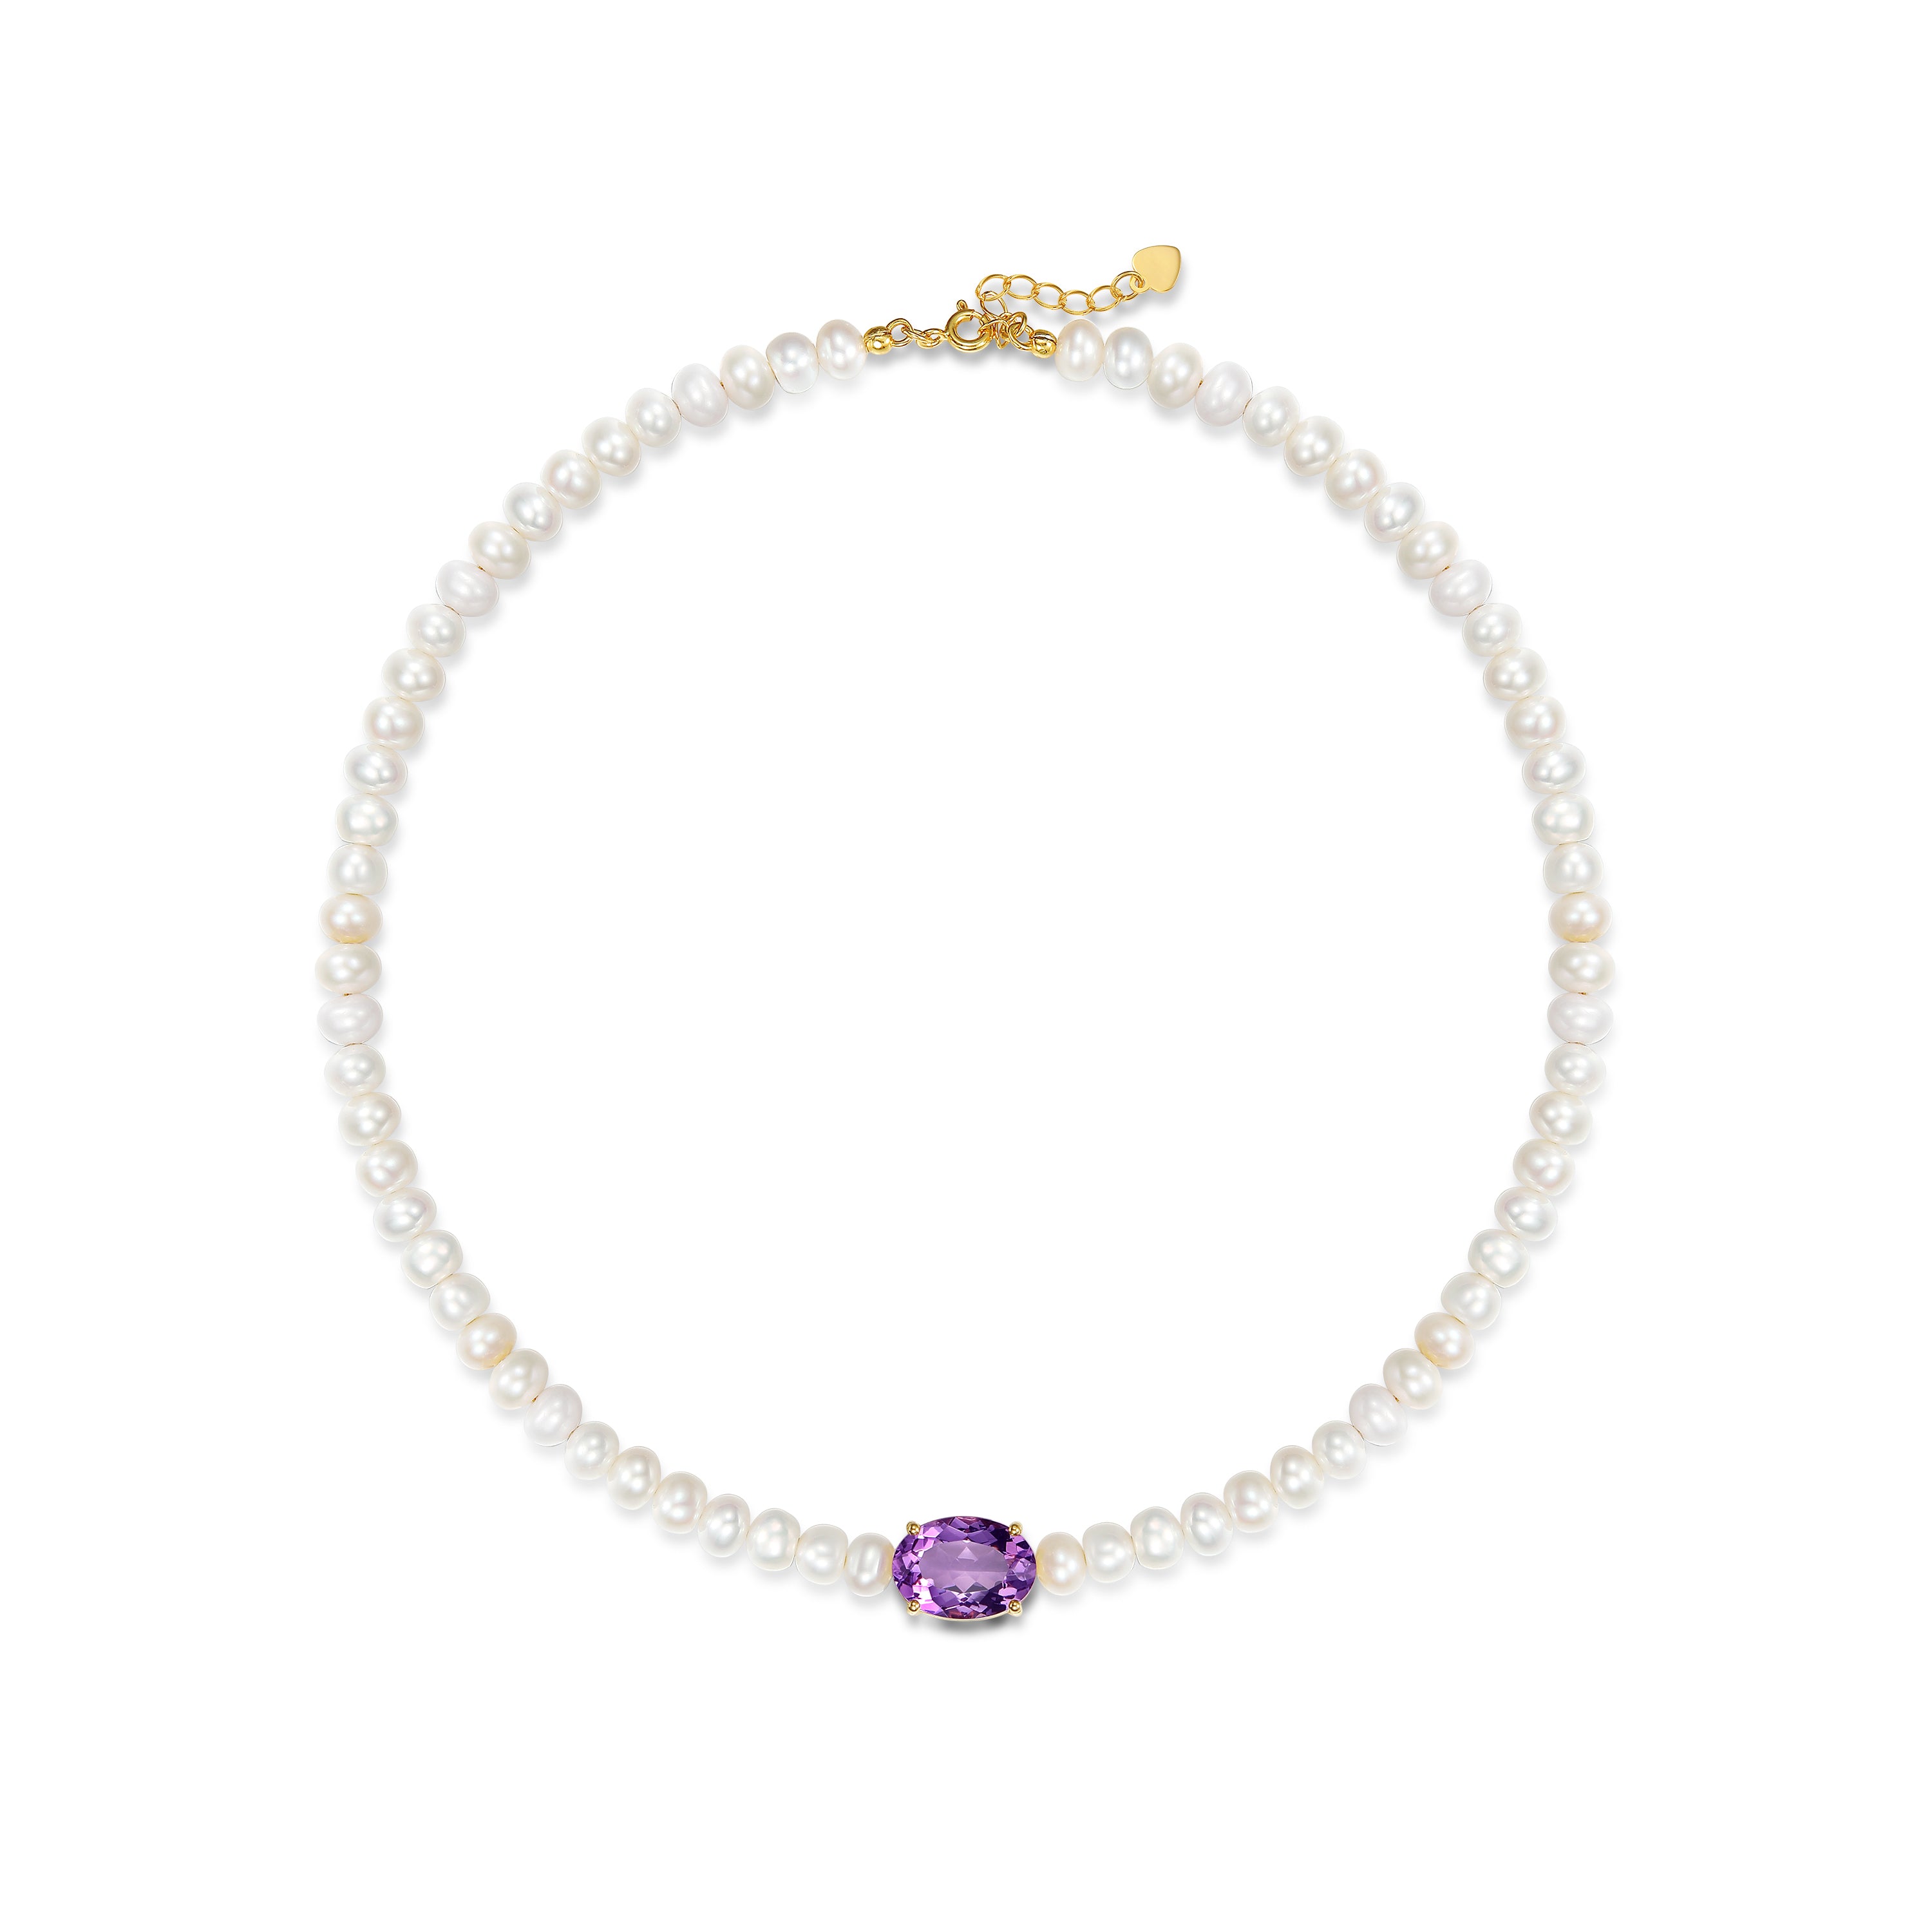 Freshwater Cultured Pearls and Amethyst Necklace - L'Amour Pearls